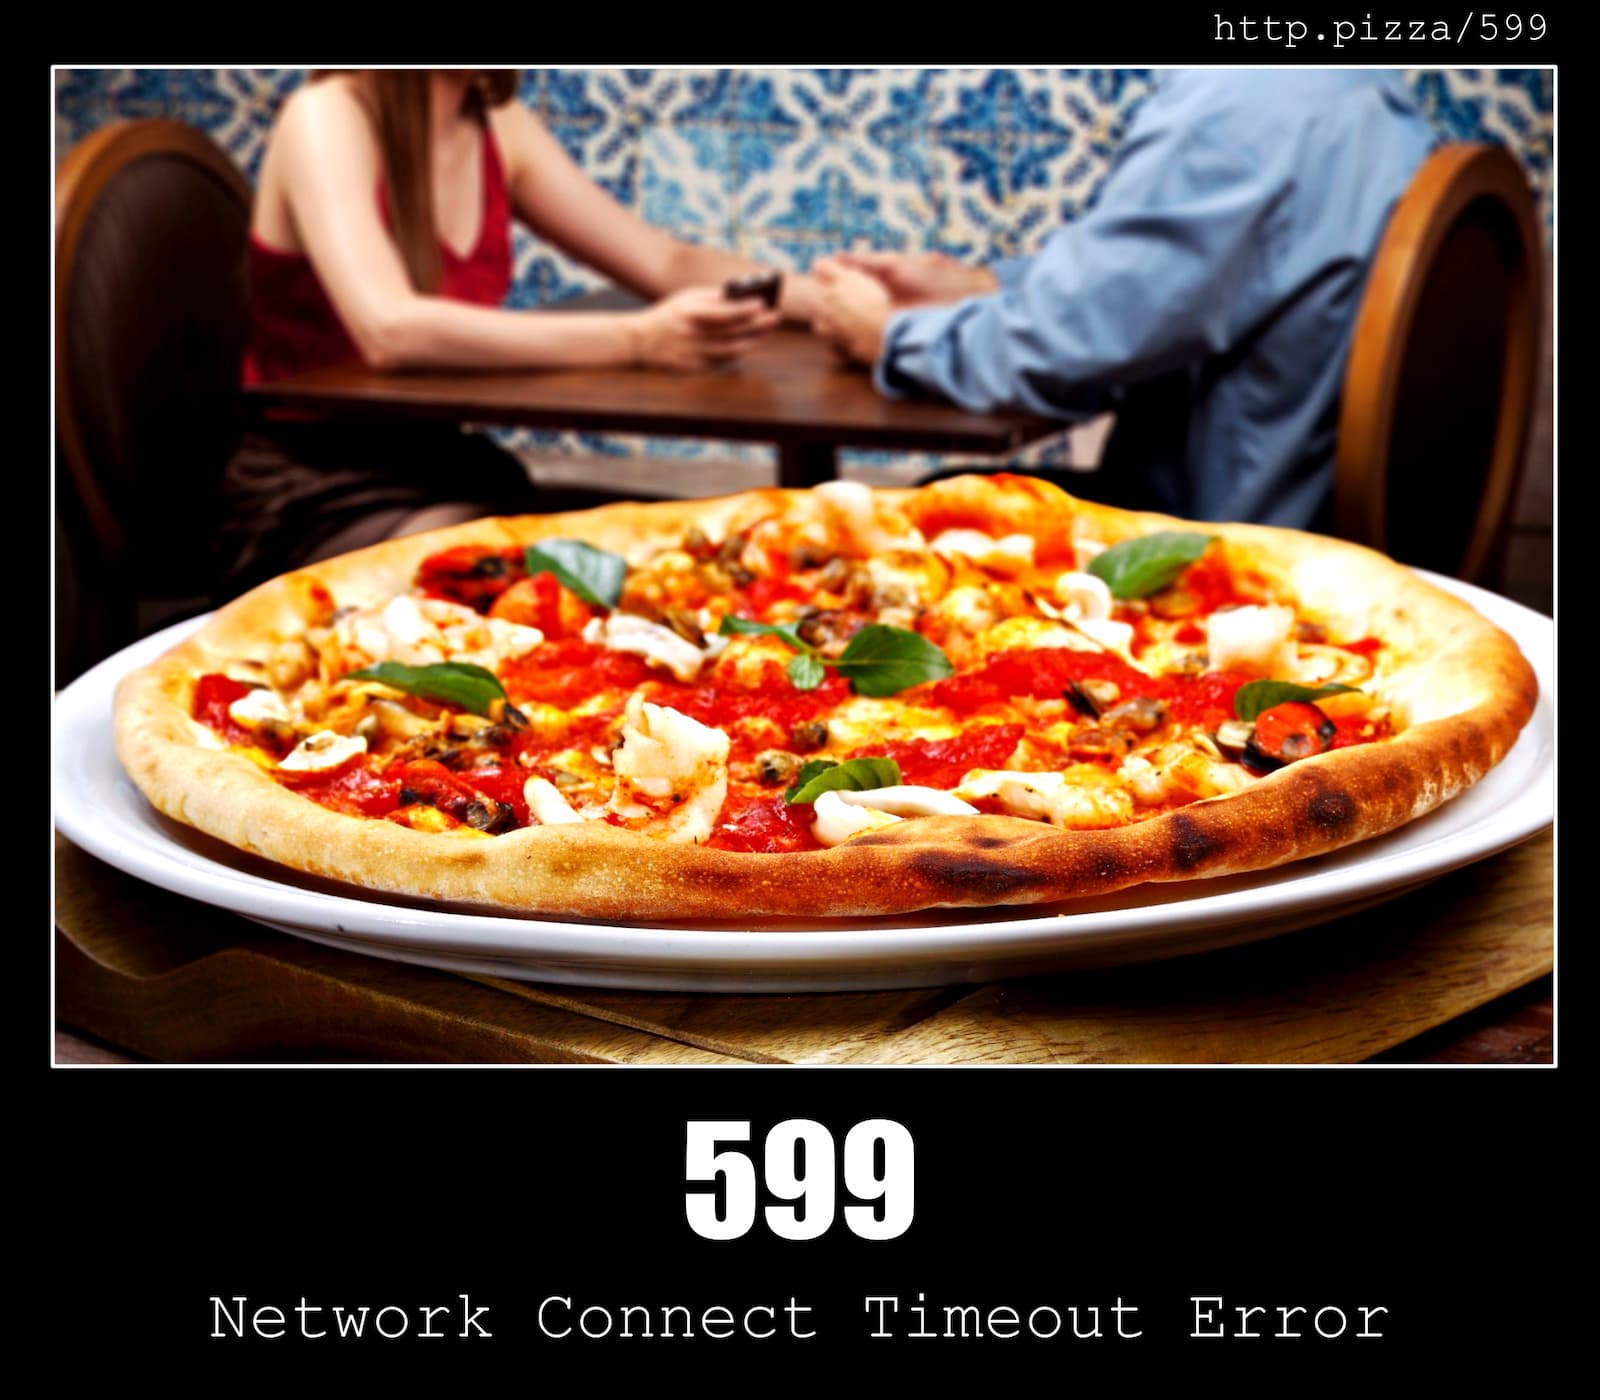 HTTP Status Code 599 Network Connect Timeout Error & Pizzas